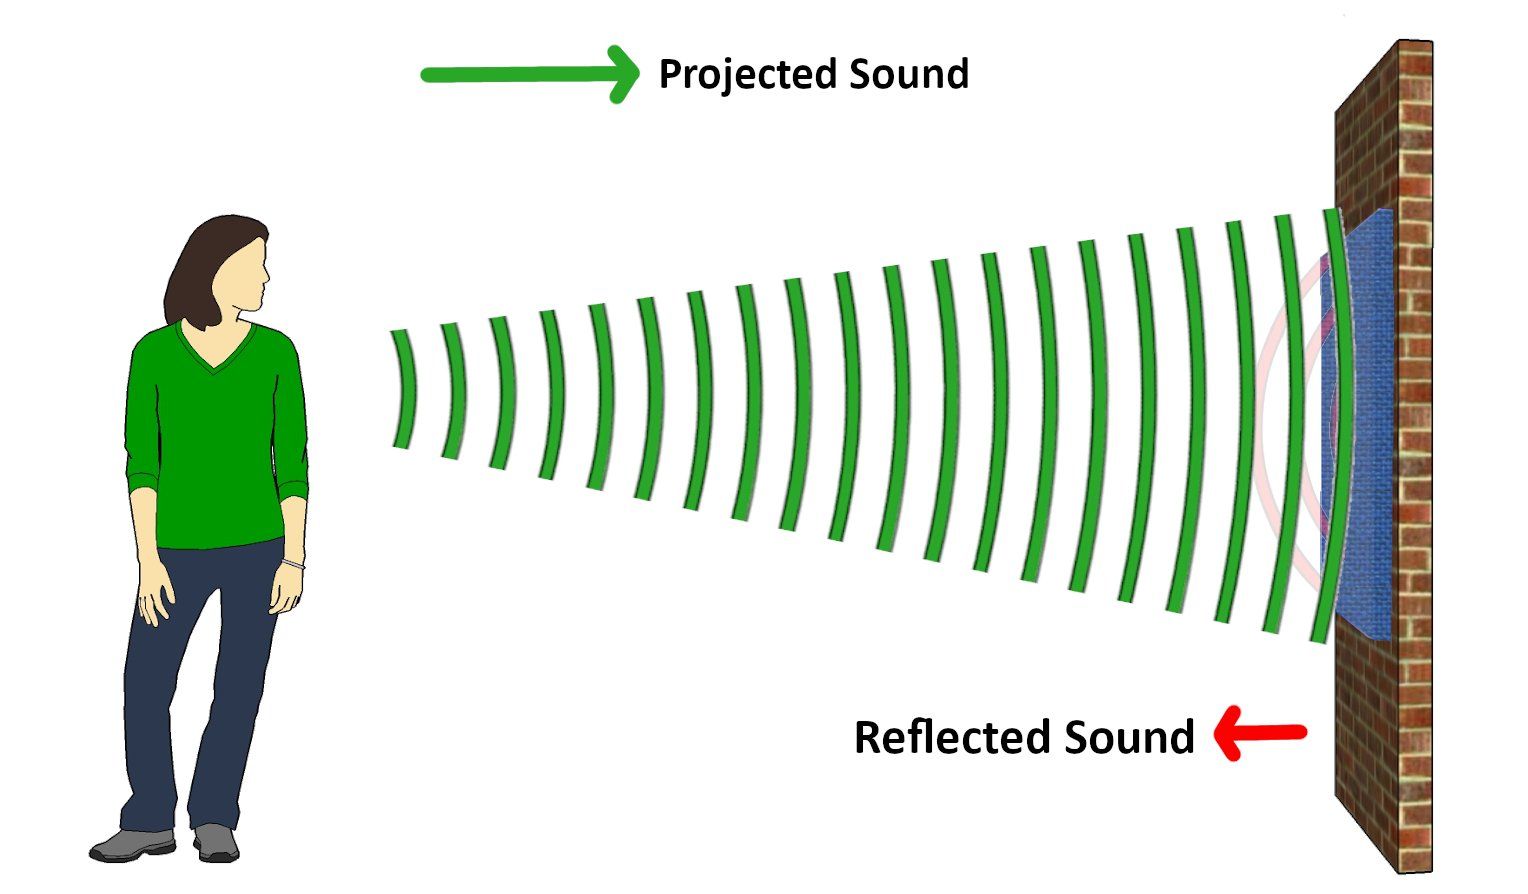 Room acoustics after installing sound absorption panels